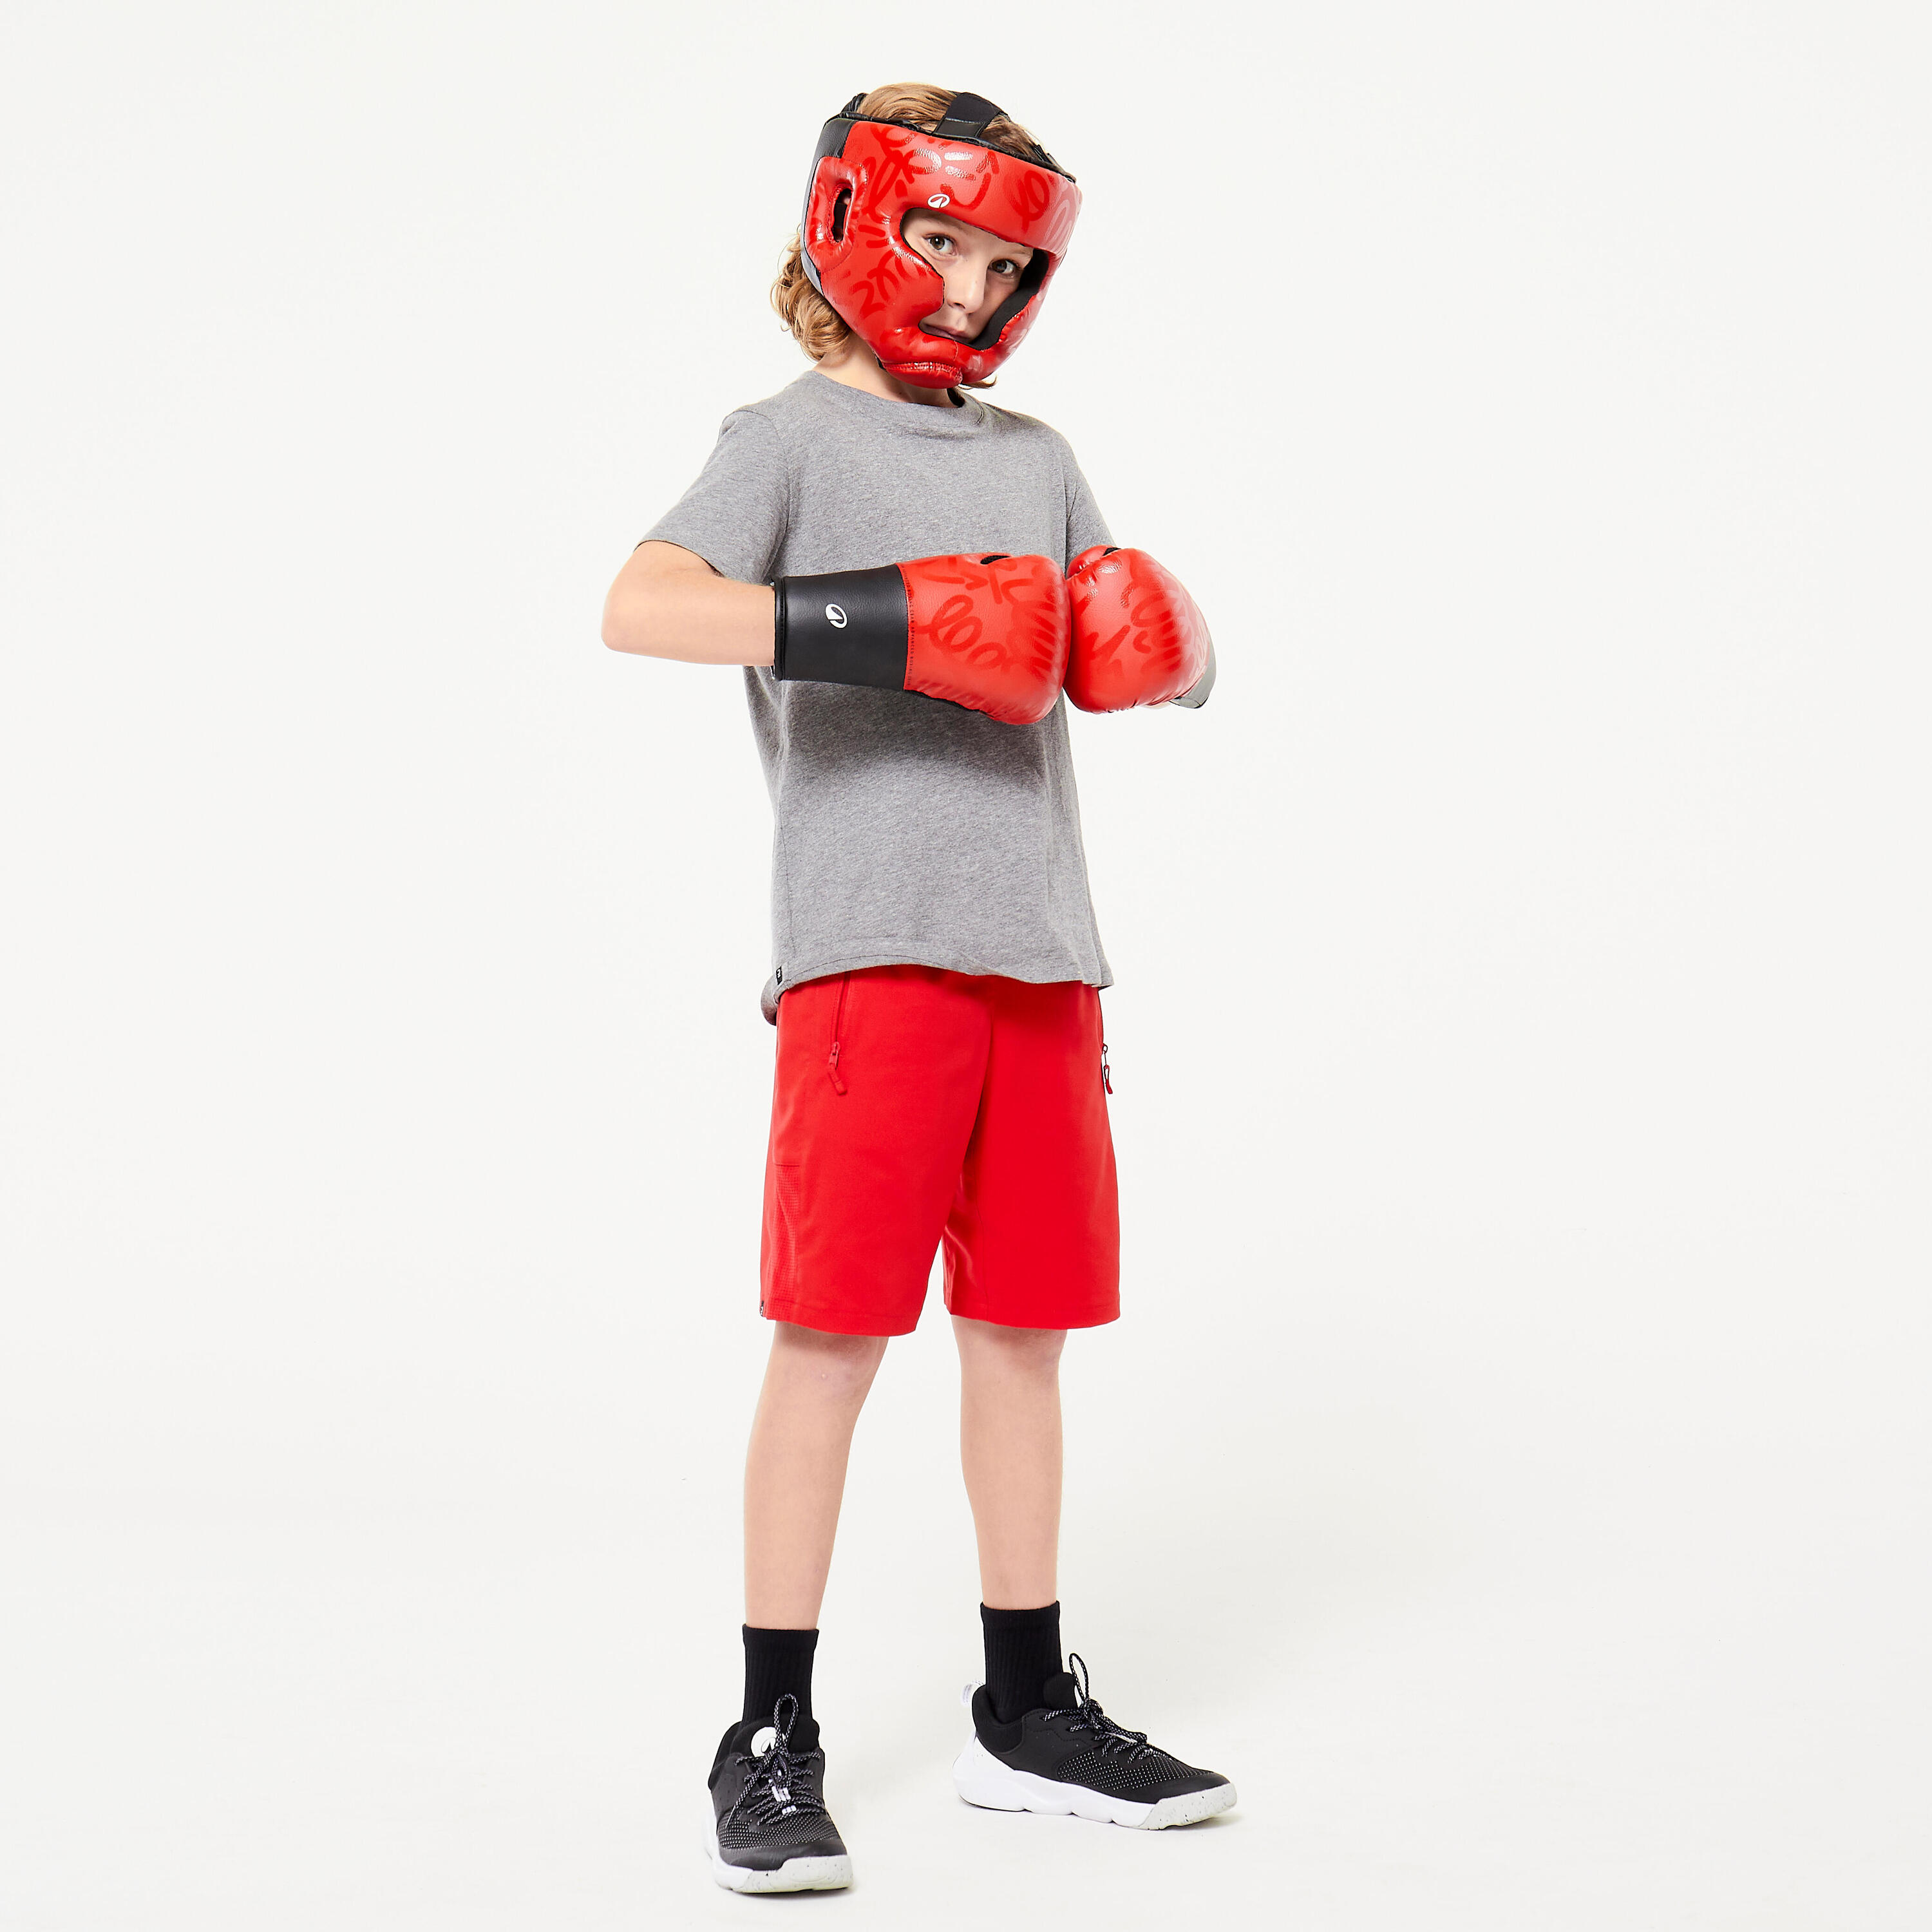 Kids' Boxing Gloves - Red 6/6